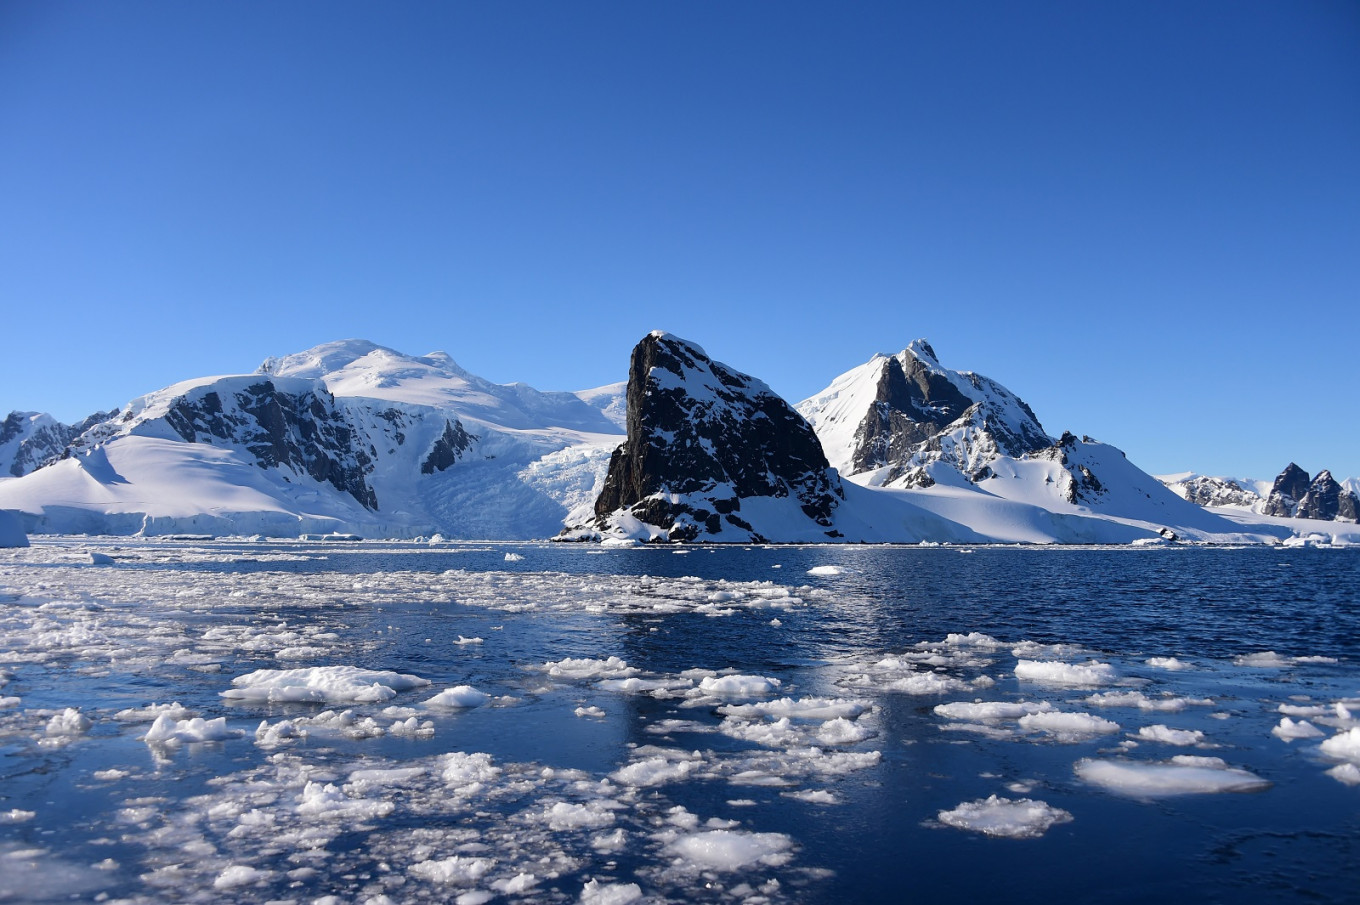 Antarctica sank by 30,000 earthquakes in 3 months, Chilean scientists say – Environment